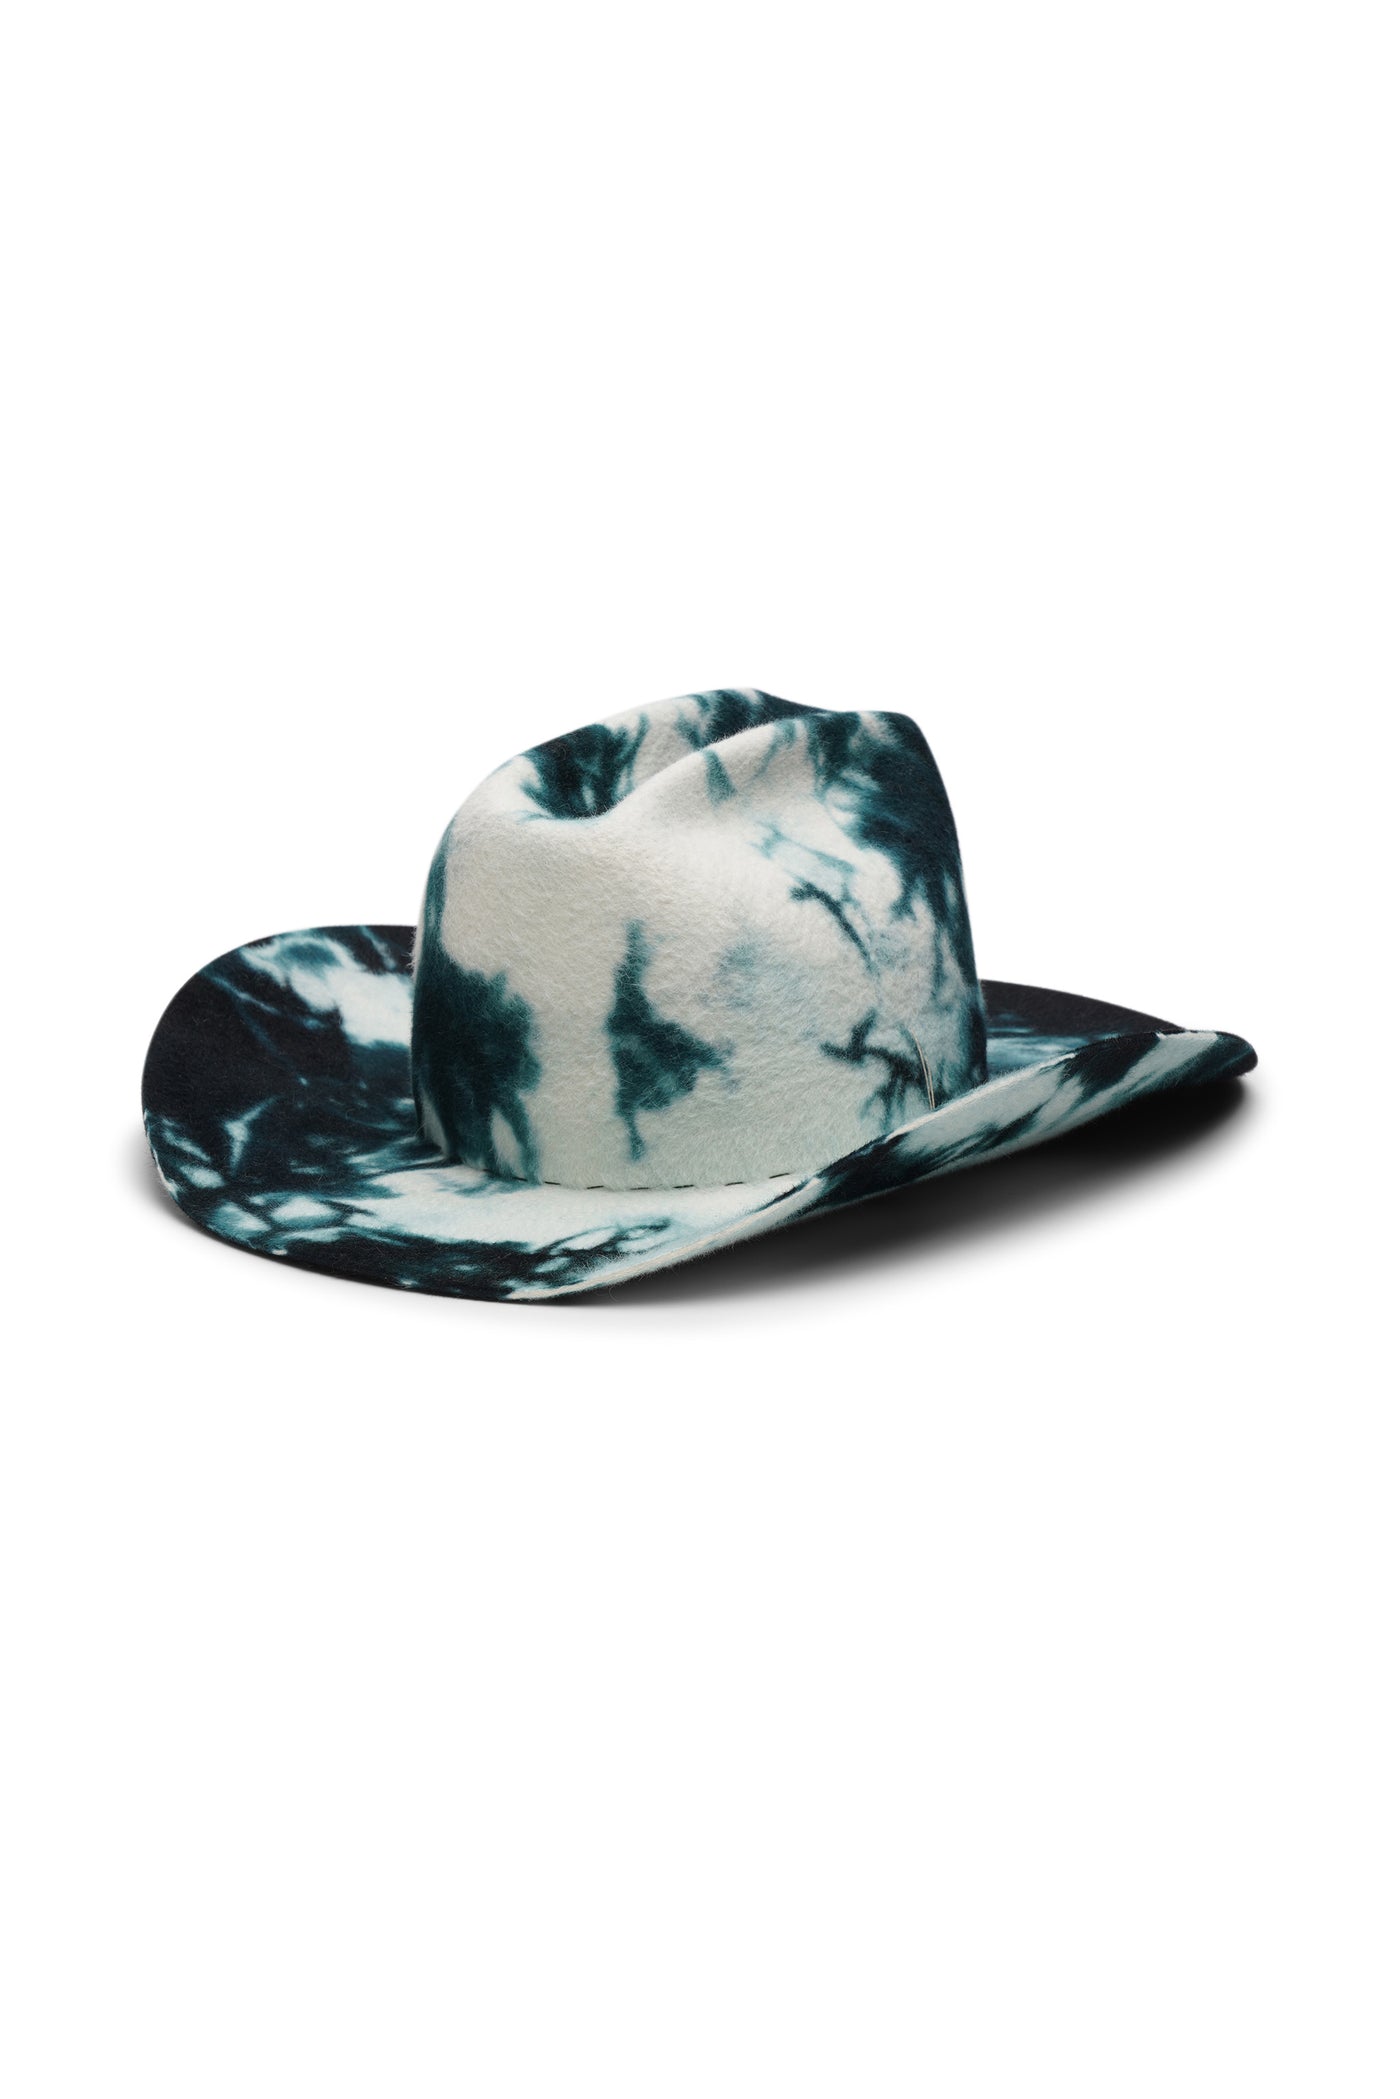 White/green tie dye cowboy in 100% velour fur felt hat with a wide brim and center crease. Unisex hat style in various sizes and colors. We ship worldwide. Shop now. Each SoonNoon hat is handmade with unique character in Stockholm, Sweden.